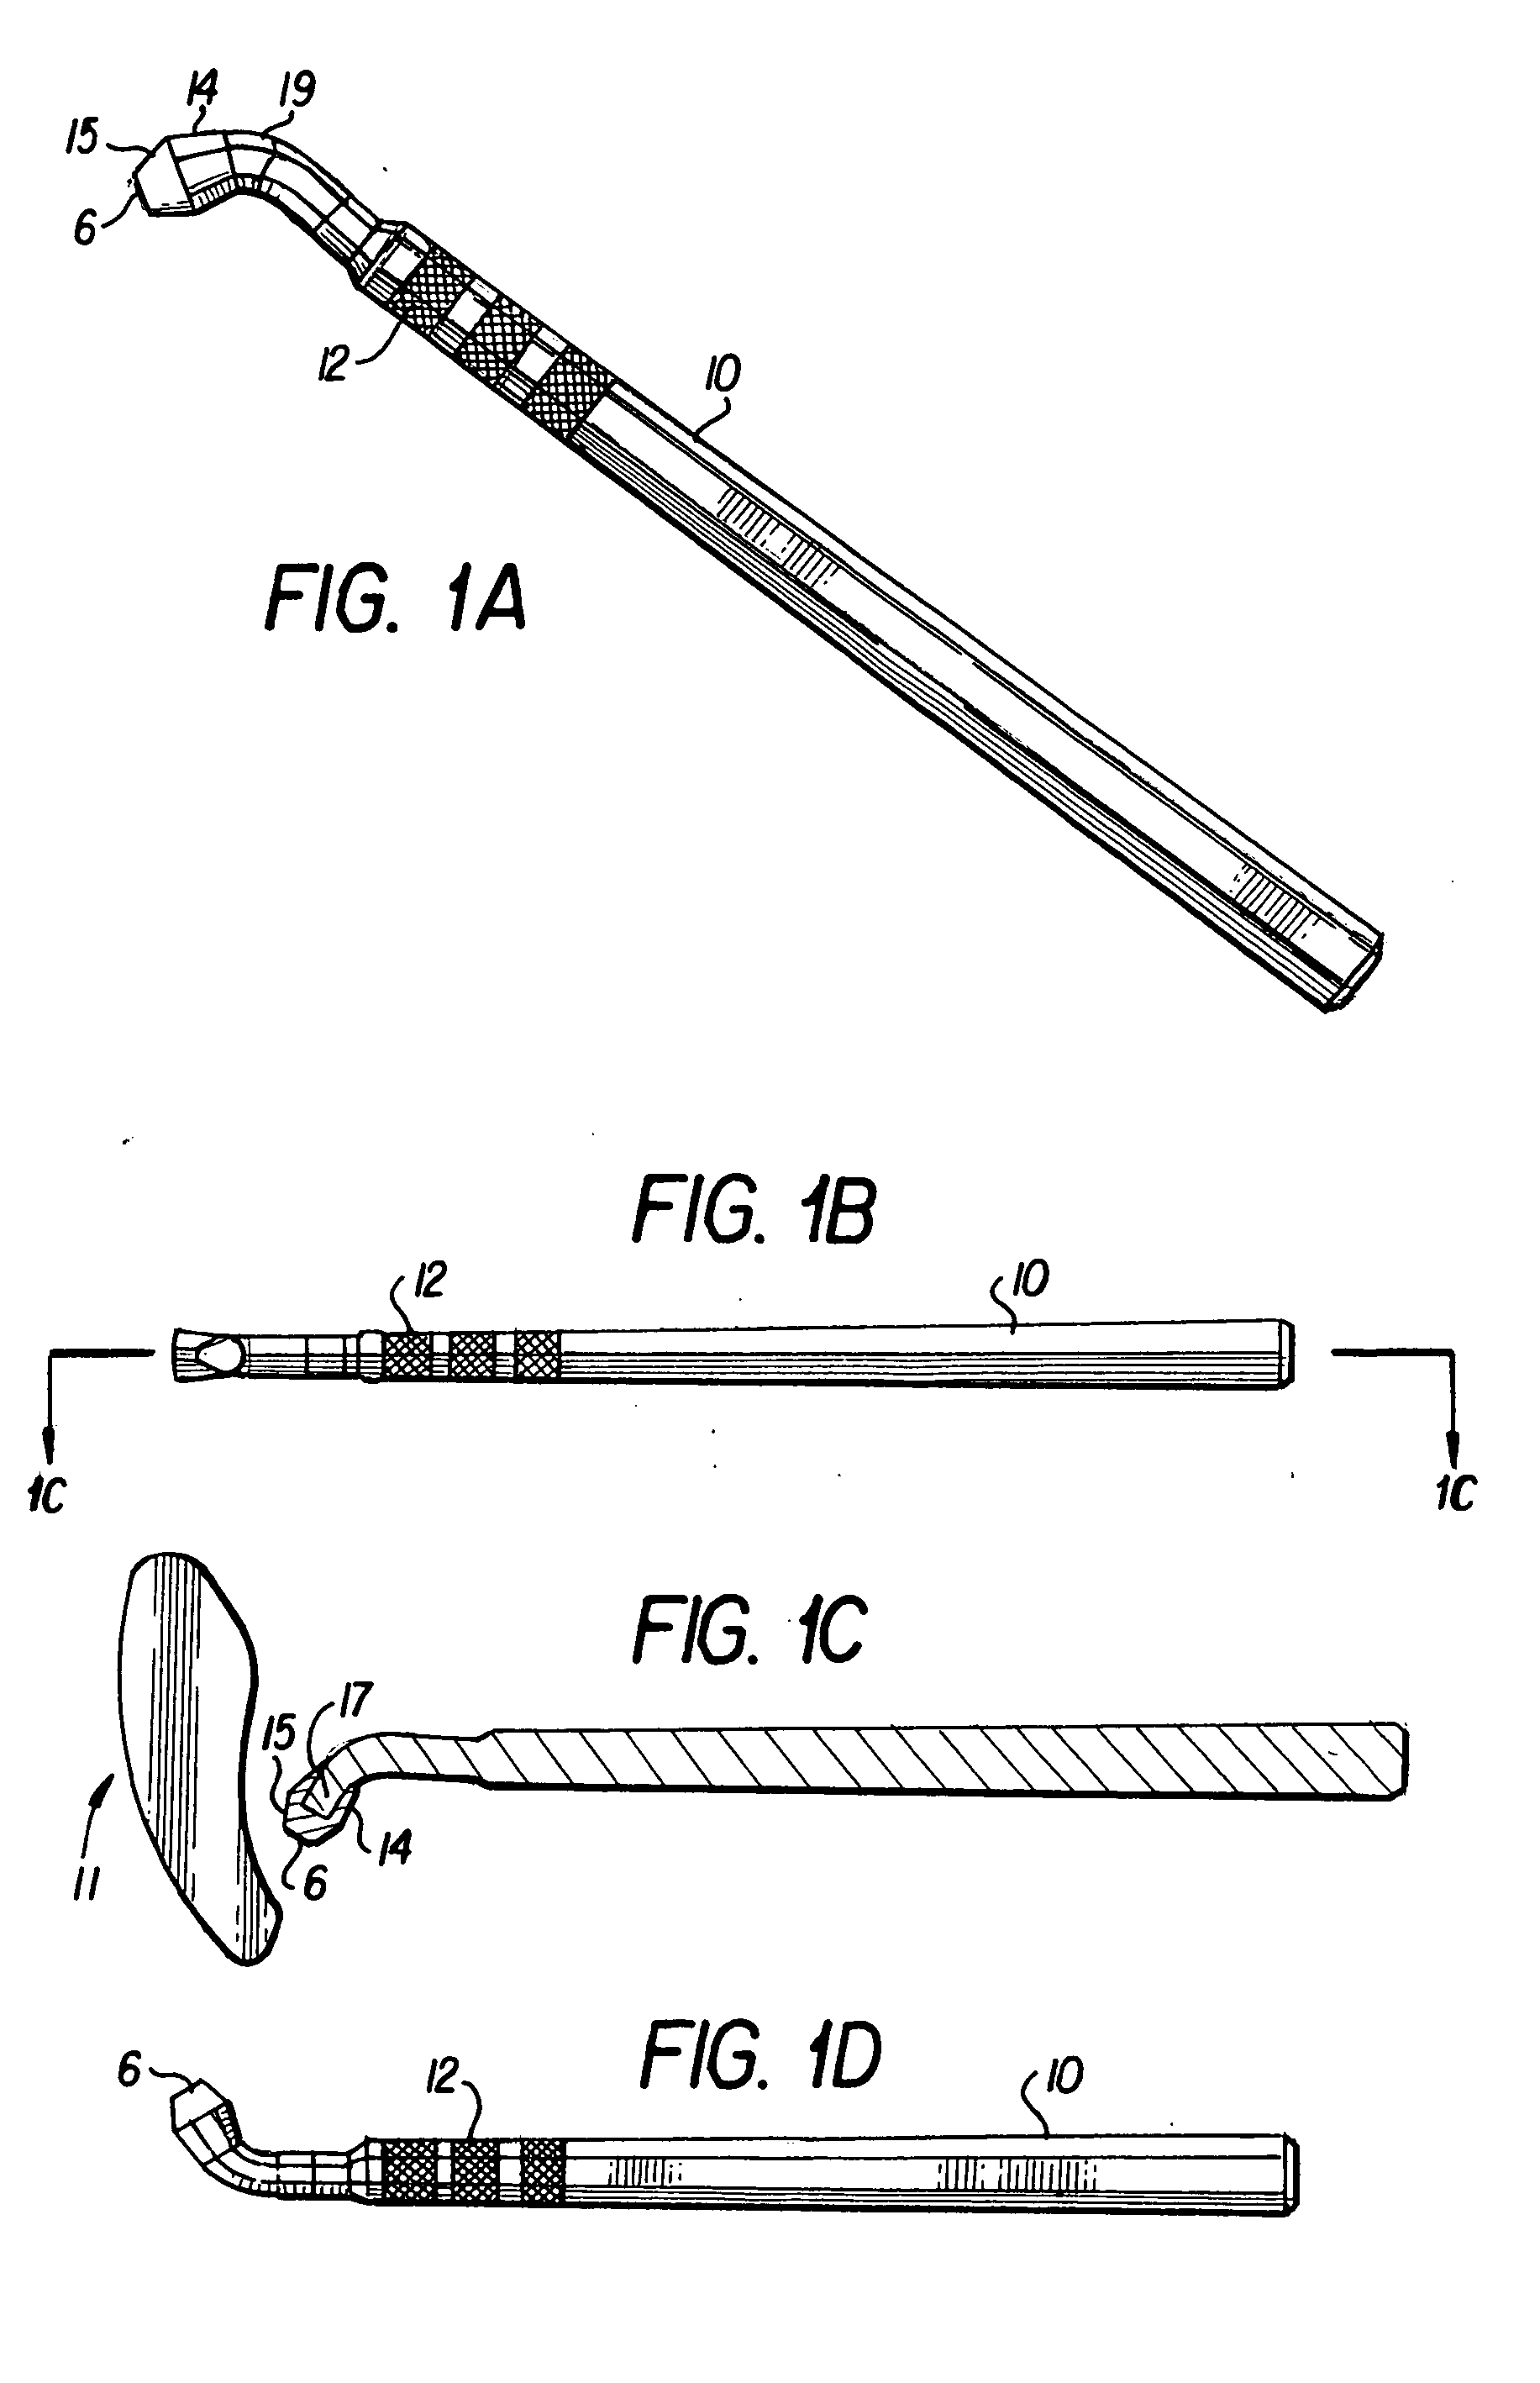 Dental appliance and method for positioning and holding inlays and onlays during bonding and cementation process